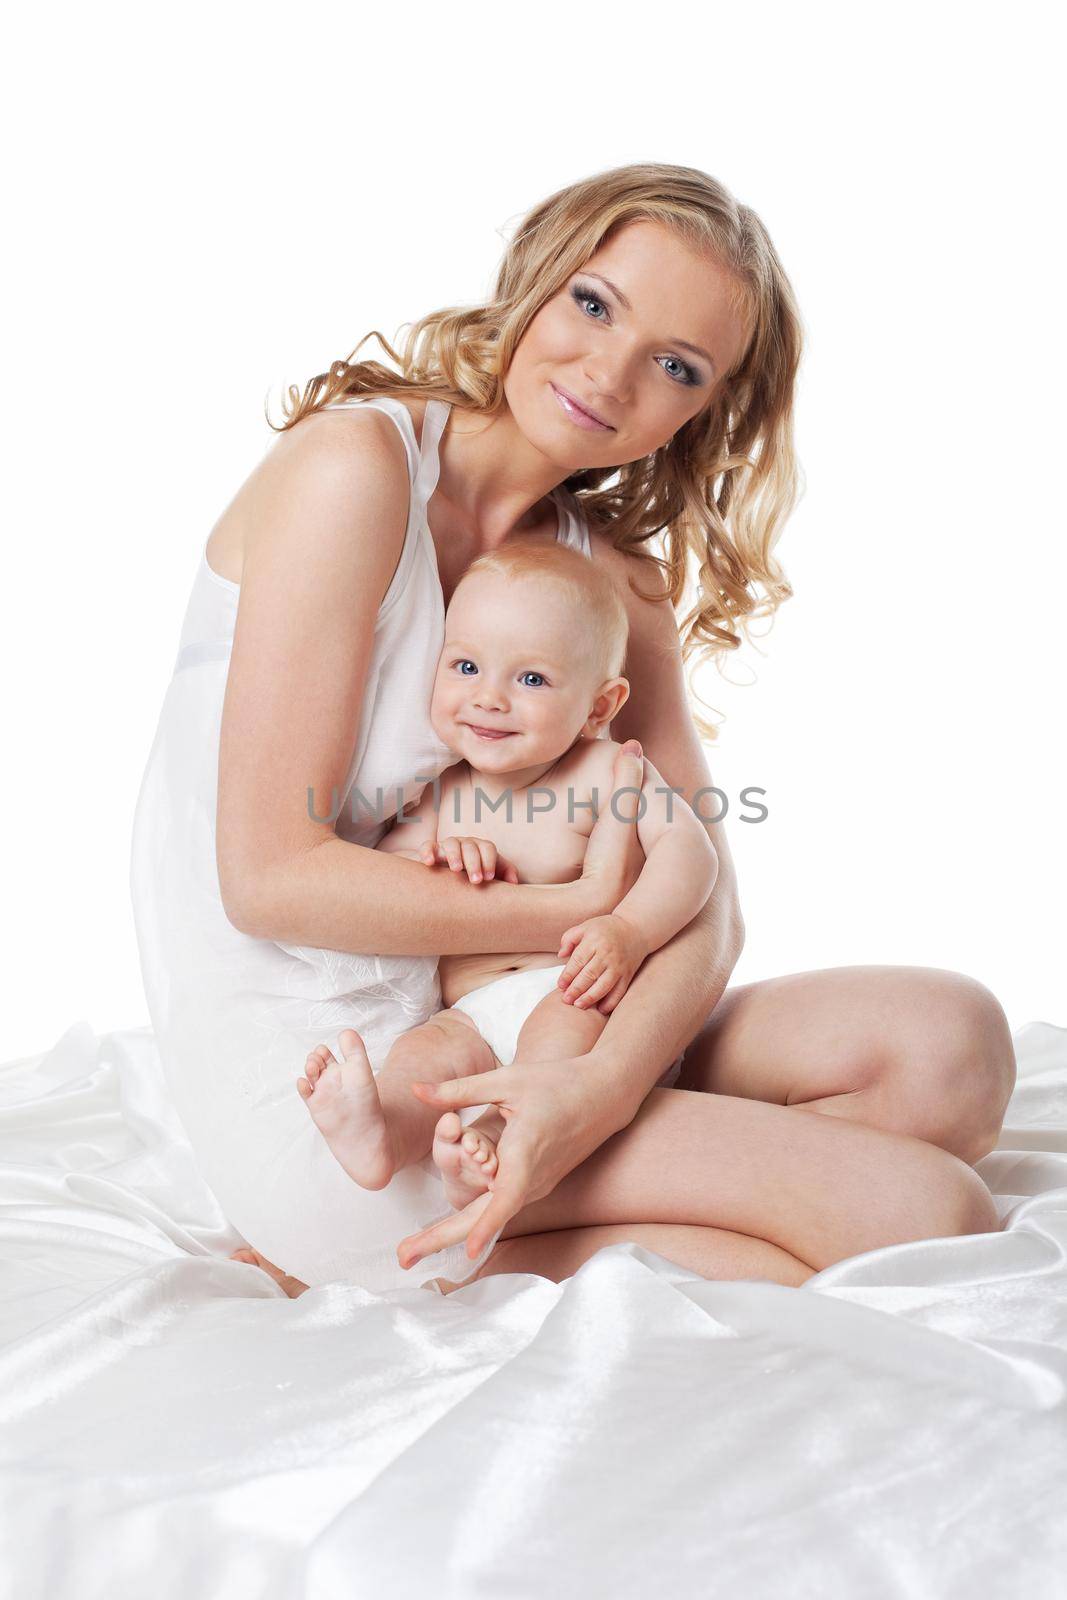 Beauty blond mother sit with son on silk bed isolated